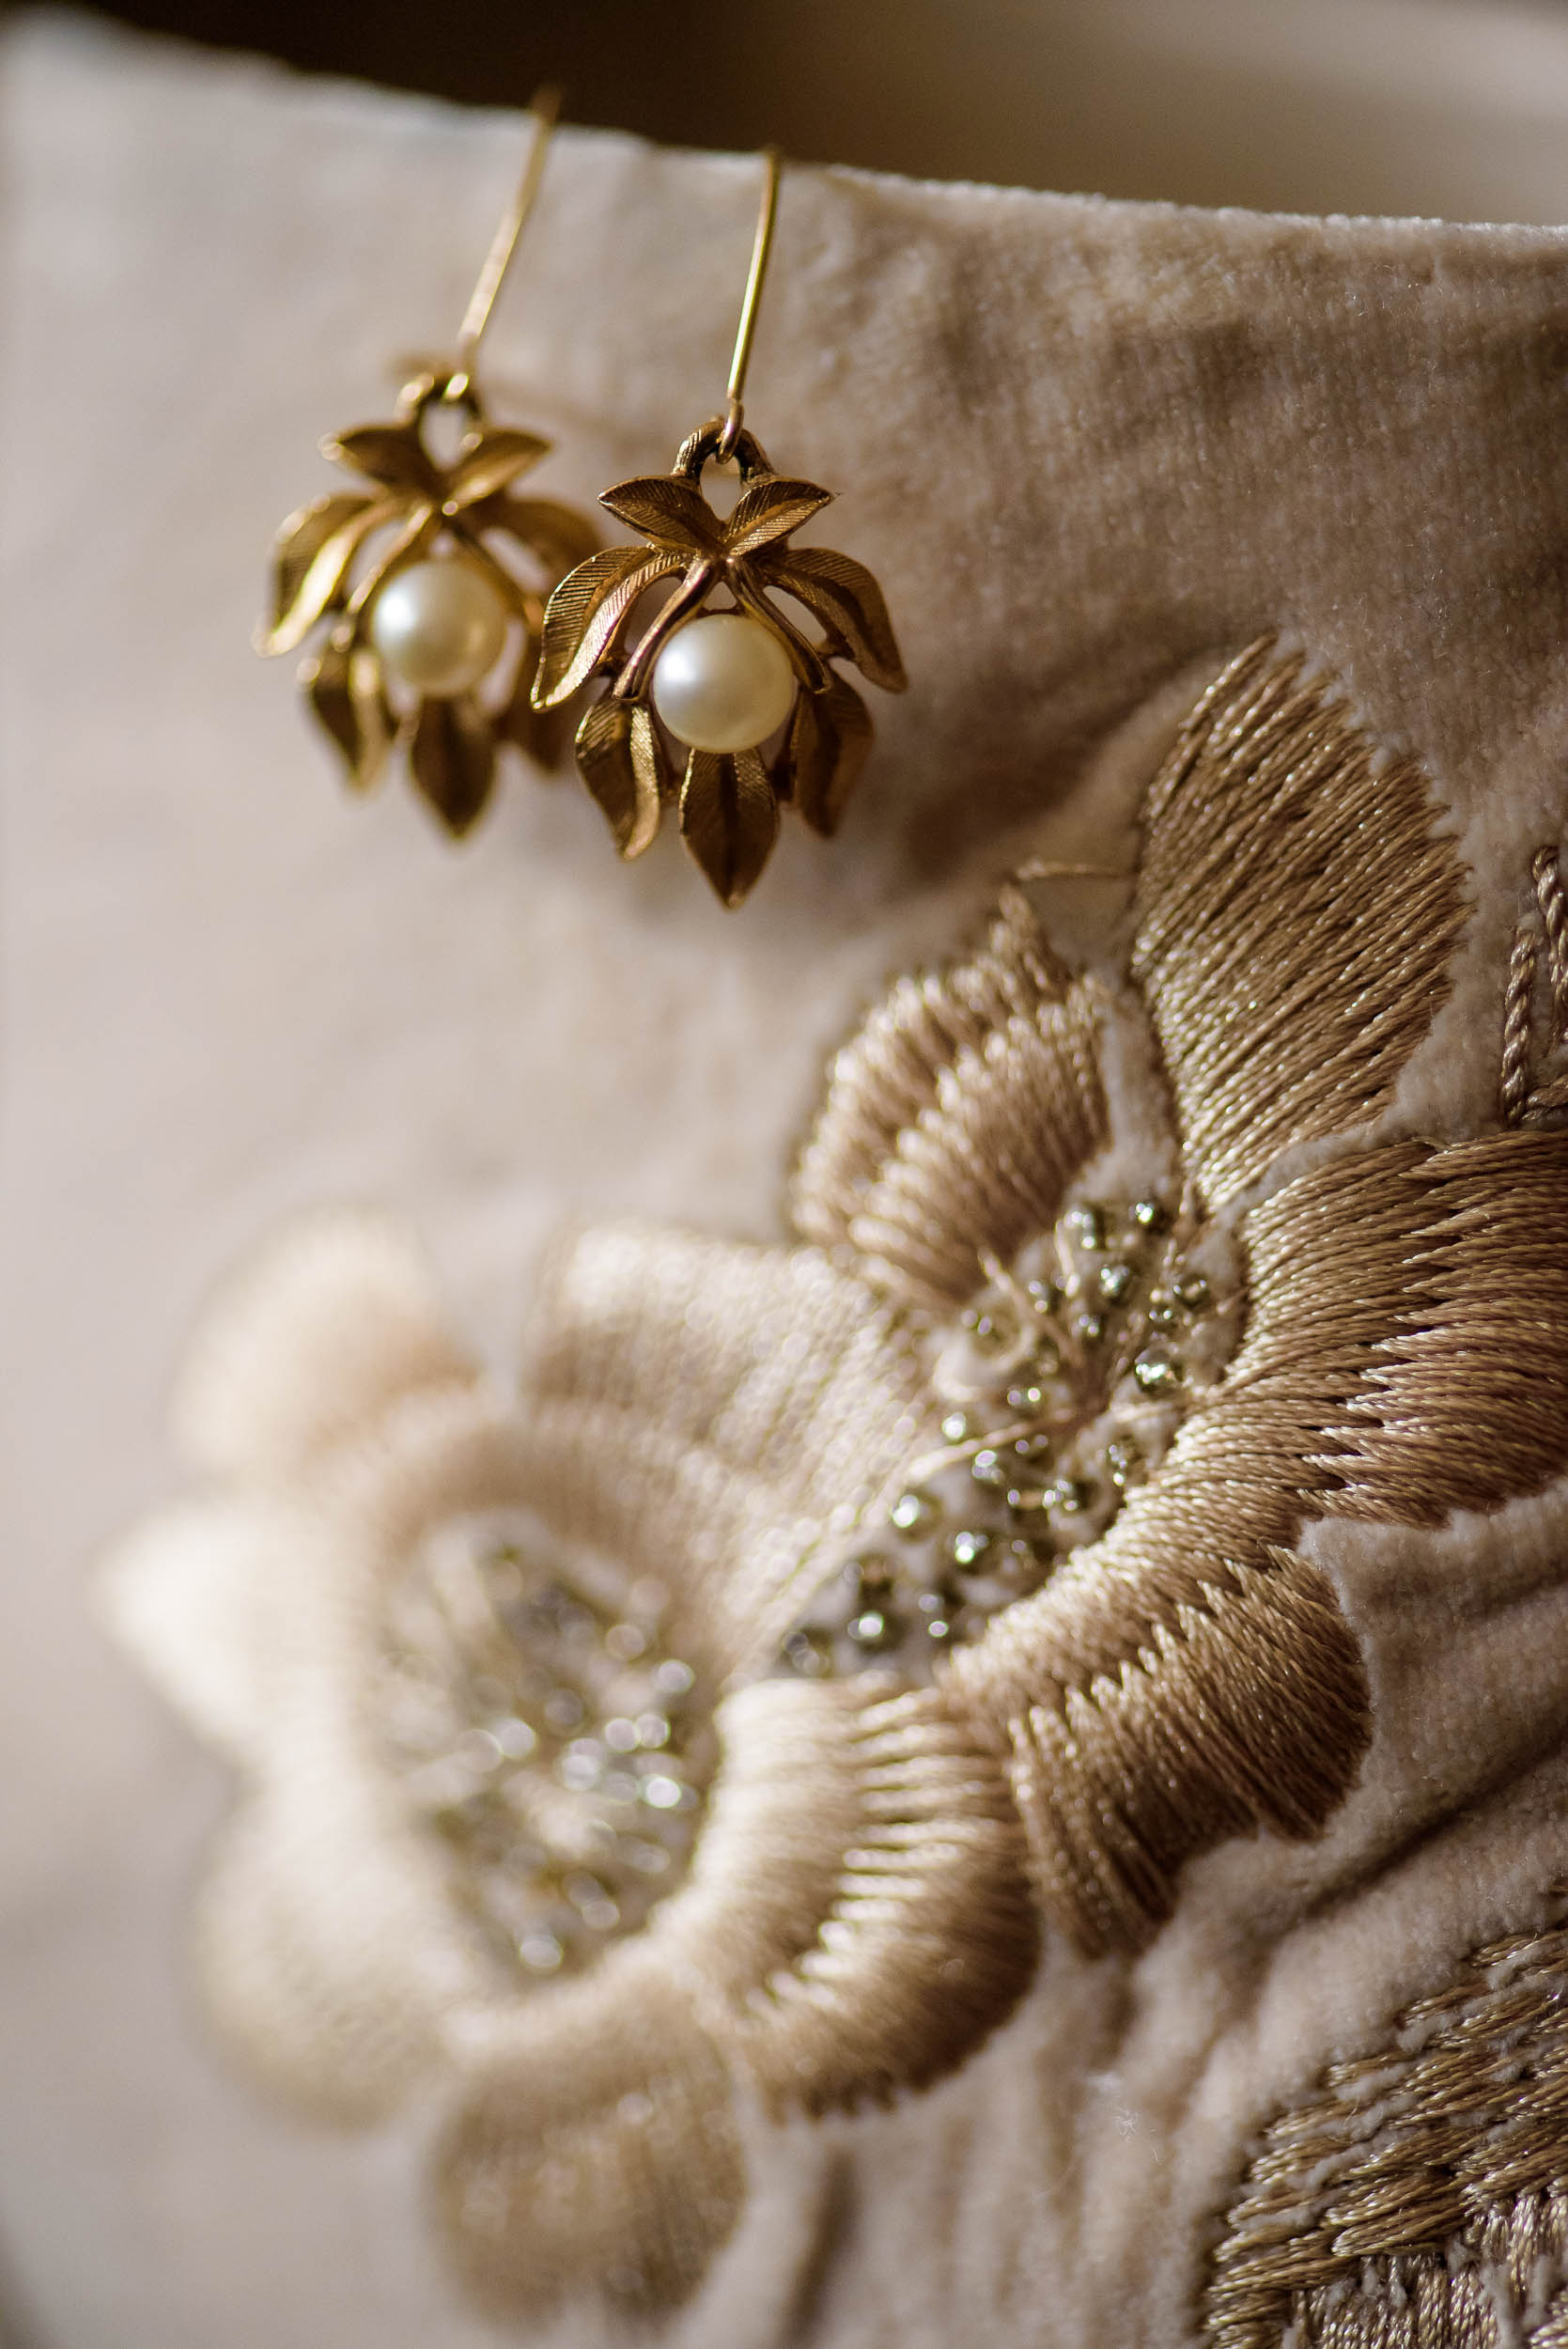 Detail photo of earring before a Loft on Lake Chicago wedding.